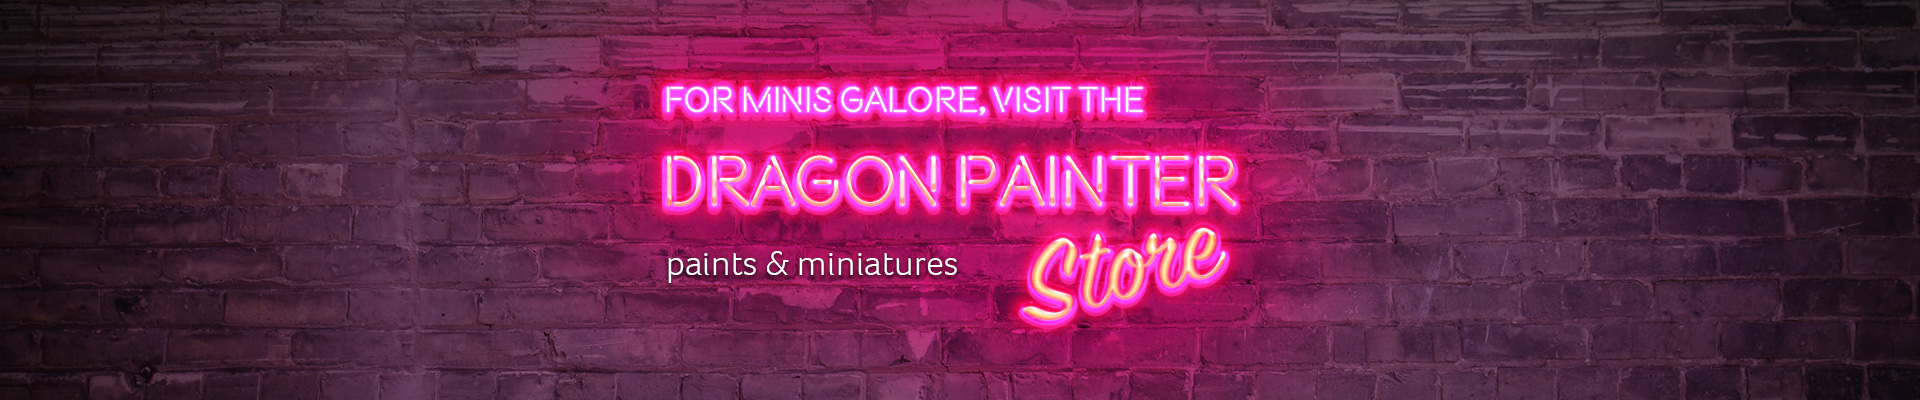 Shop now for miniatures, paint and other hobby items!